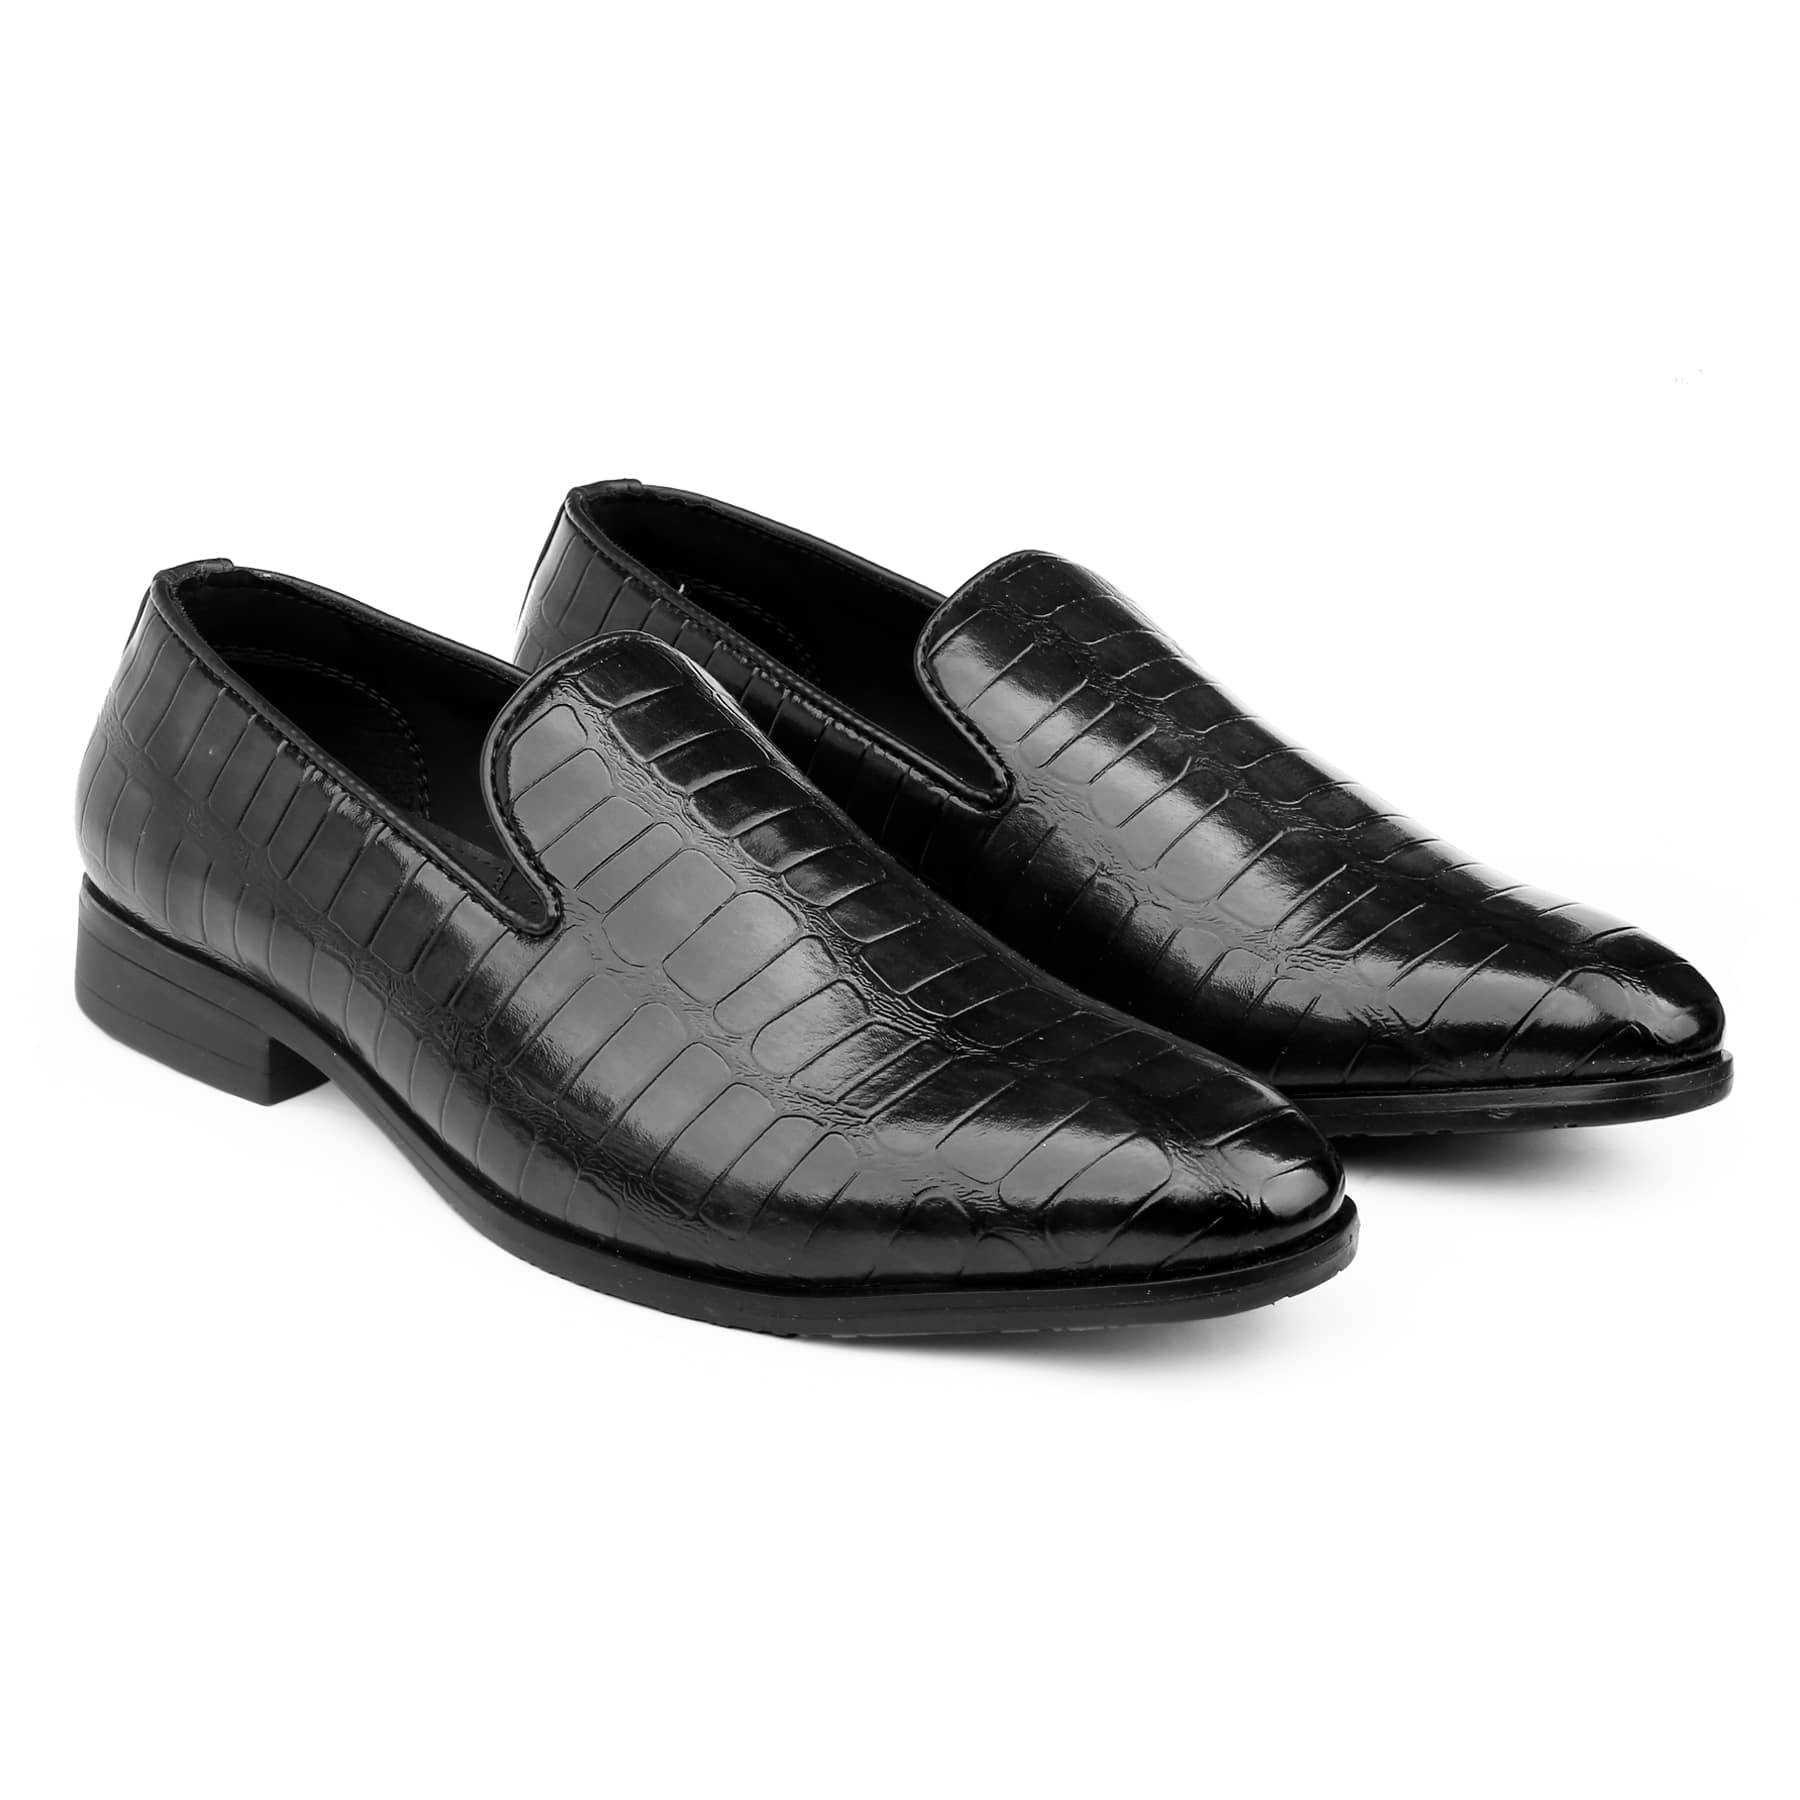 Bacca Bucci Men's NAPLES Party Textured Loafers | Wedding Dress Formal Slip-on Shoes